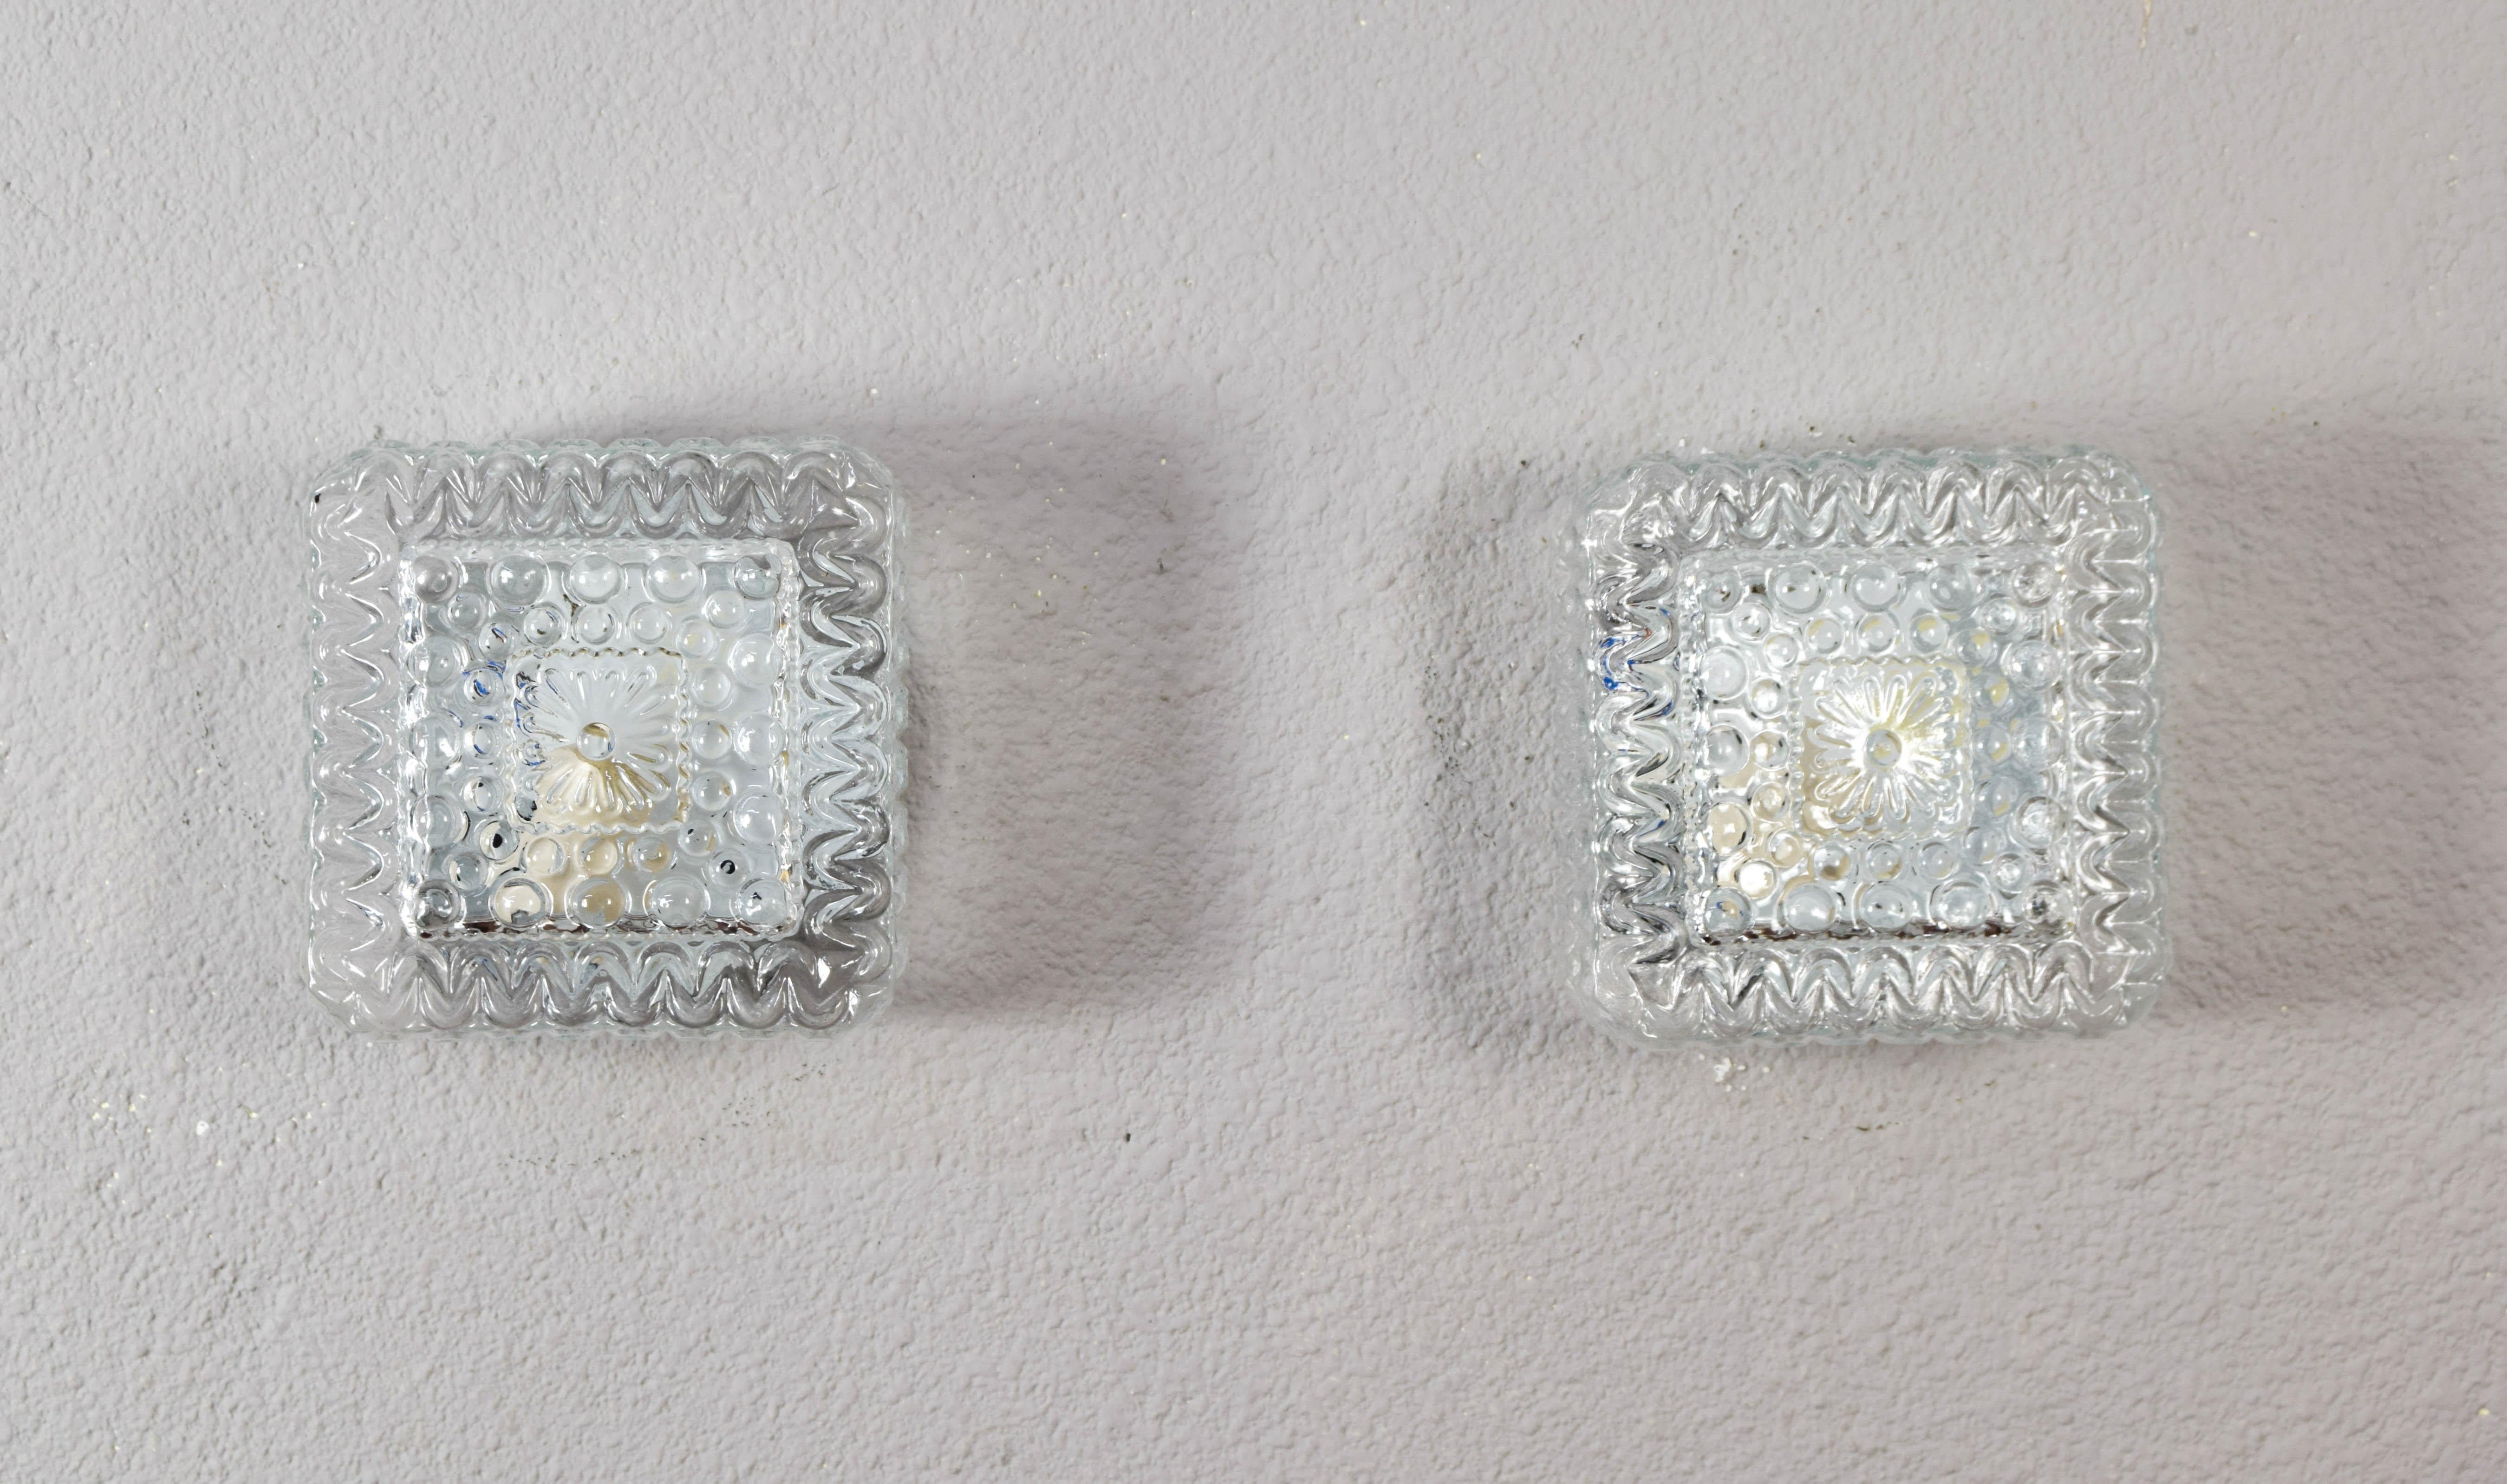 Beautiful set consisting of two wall lights or flush mount lamps of Germany origin manufactured in the 1960s.
Square in shape and made of transparent cut glass, they consist of an E27 light bulb socket.
The shapes of the glass create a very pleasant